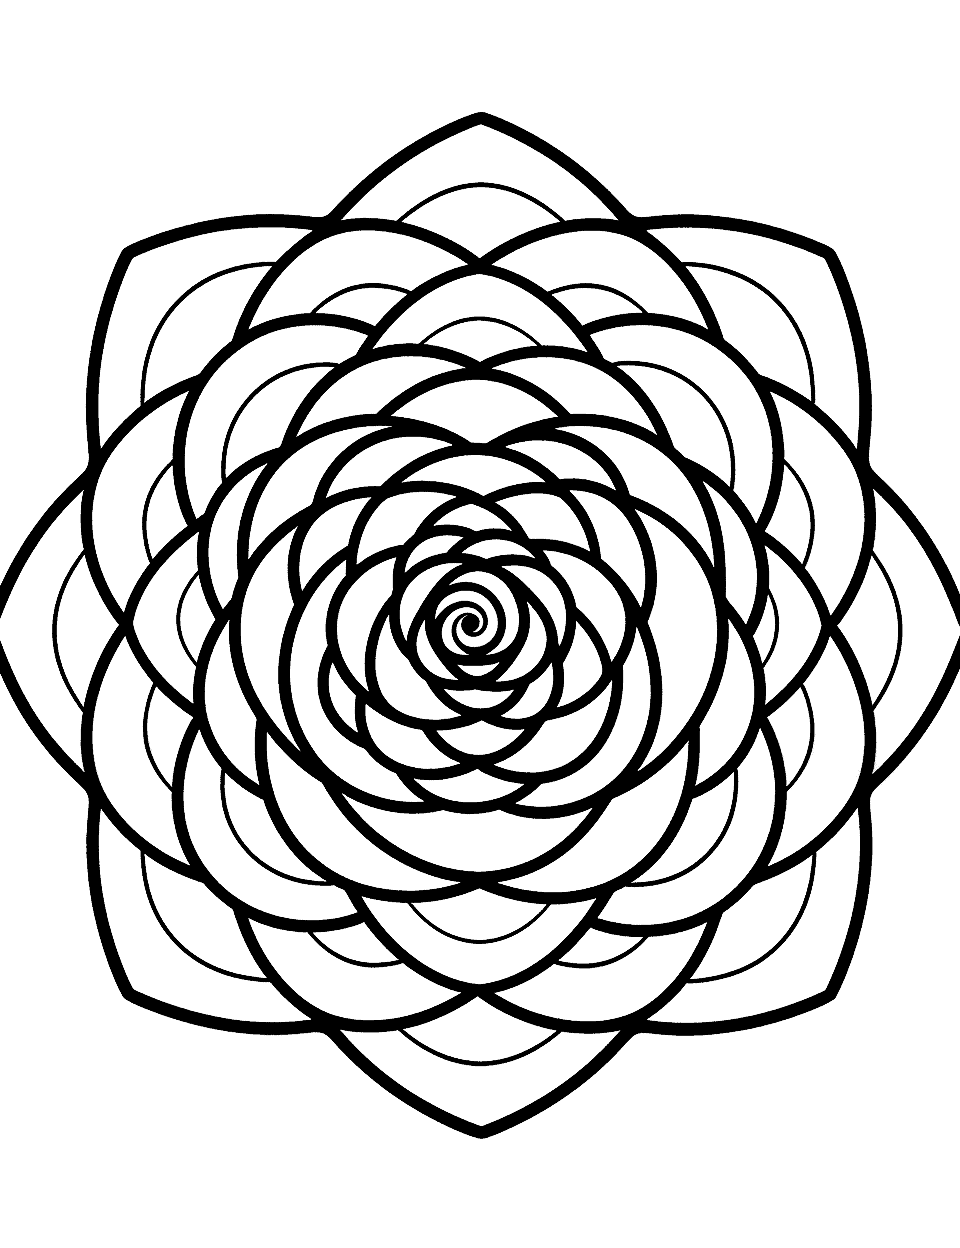 Rainbow Rose Mandala Coloring Page - A unique mandala design with roses in all colors of the rainbow, providing a fun and vibrant coloring experience.